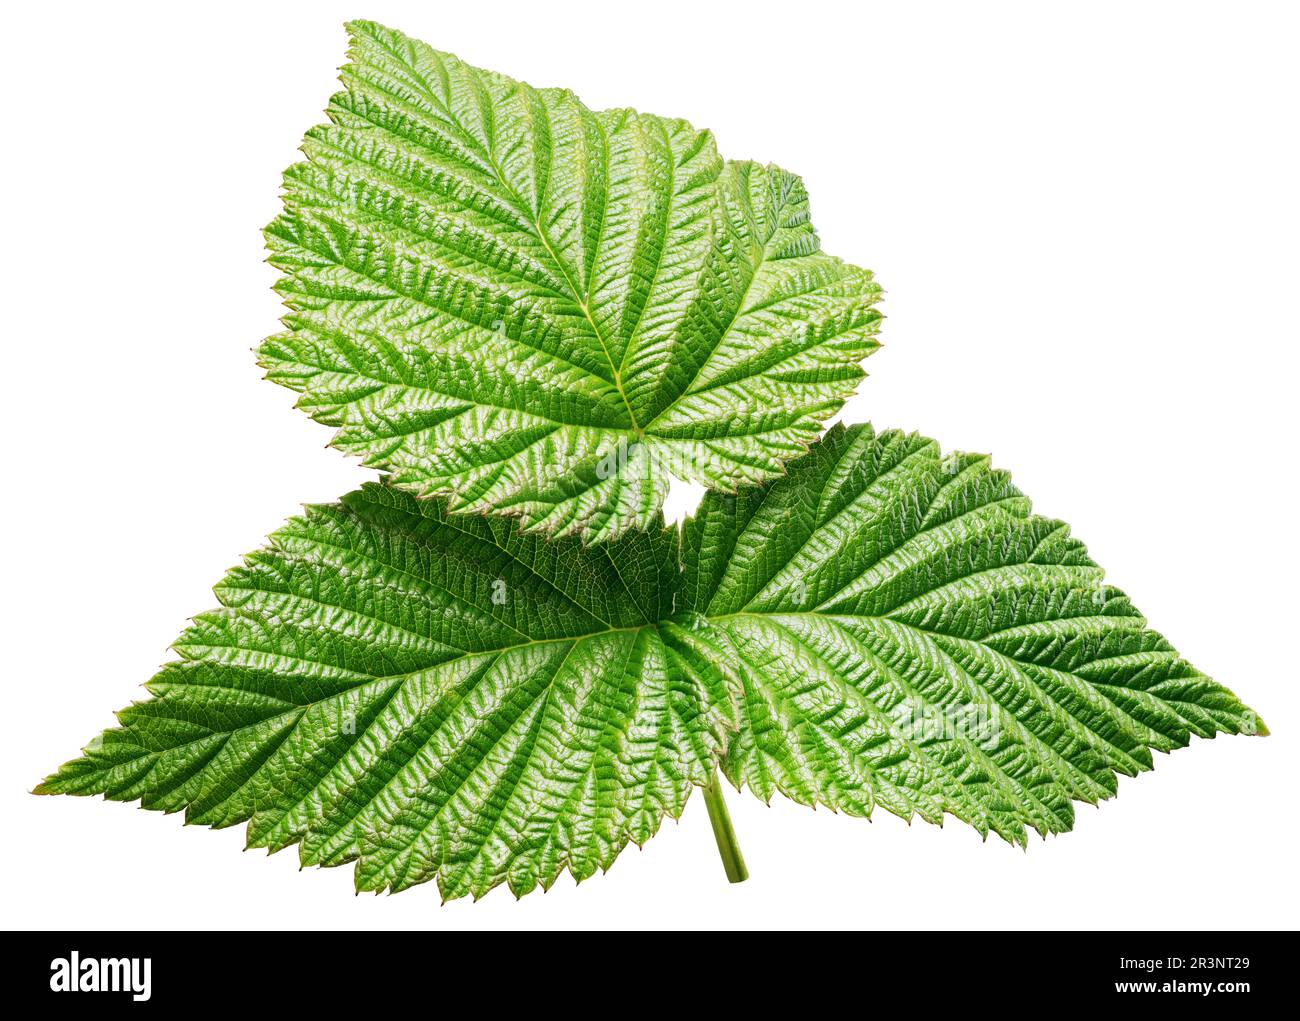 Raspberry green leaf isolated on white background with clipping path. Stock Photo